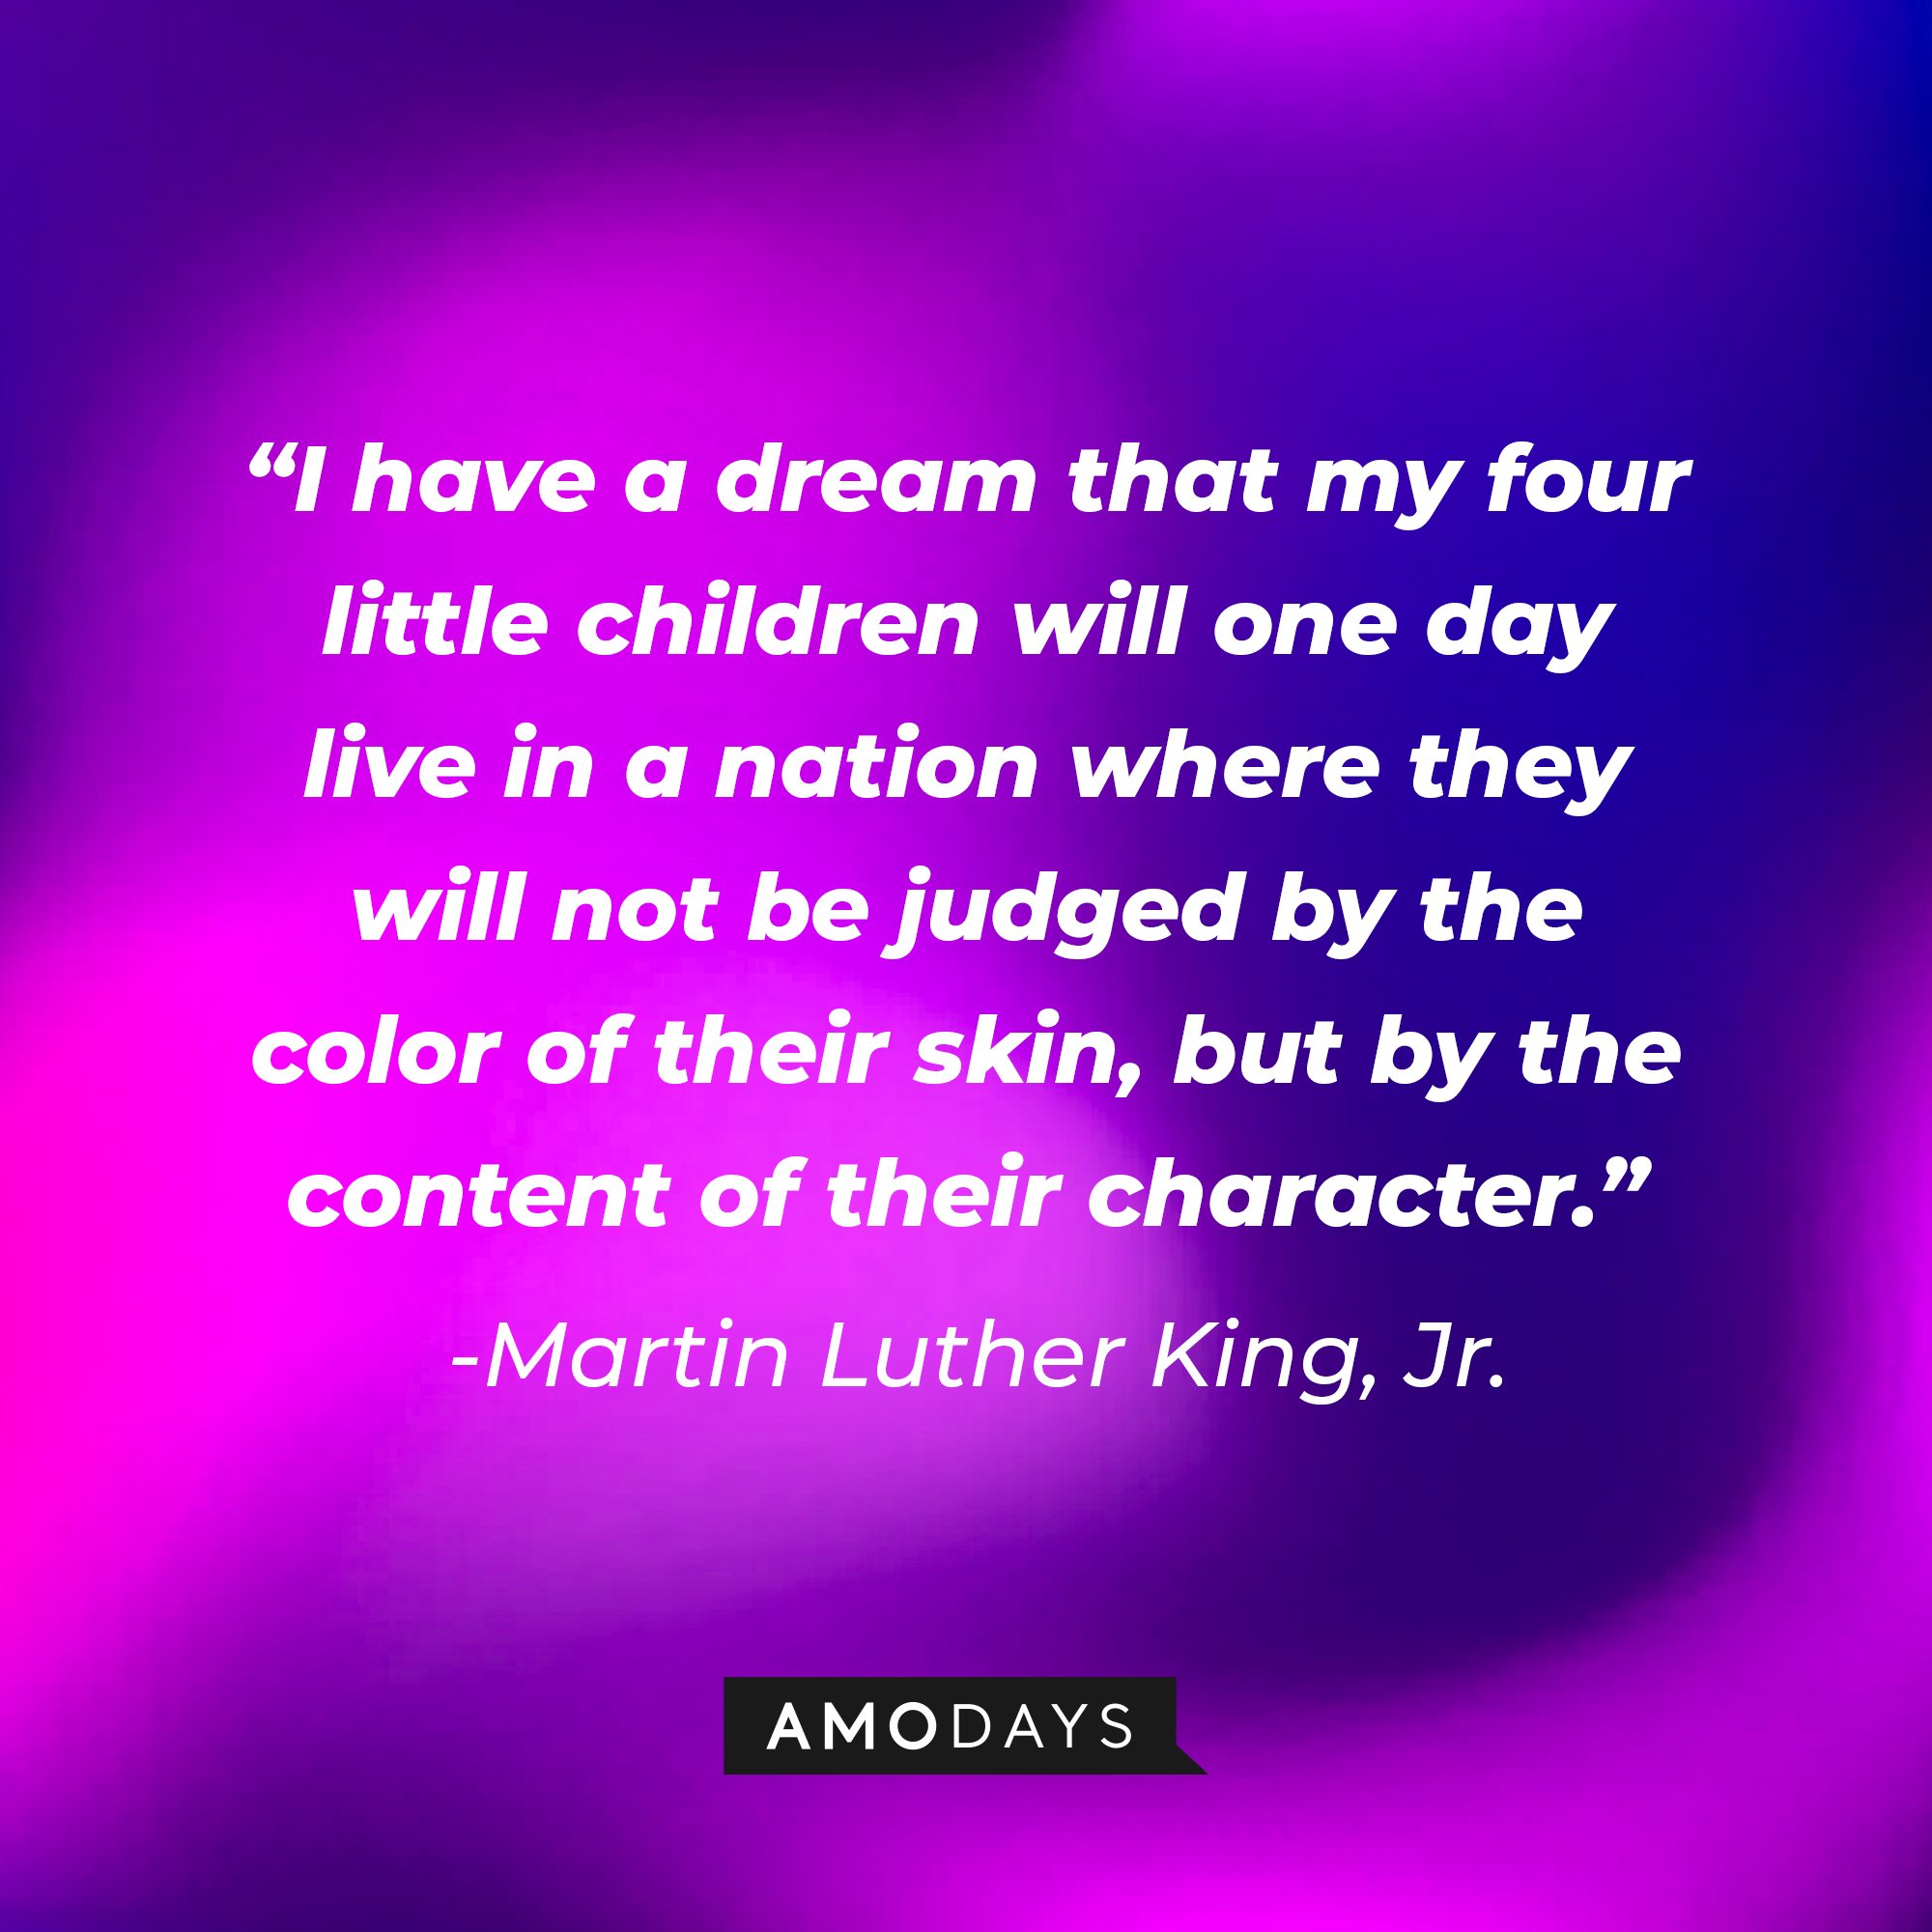 Martin Luther King Jr.'s quote: "I have a dream that my four little children will one day live in a nation where they will not be judged by the color of their skin, but by the content of their character." | Image: AmoDays